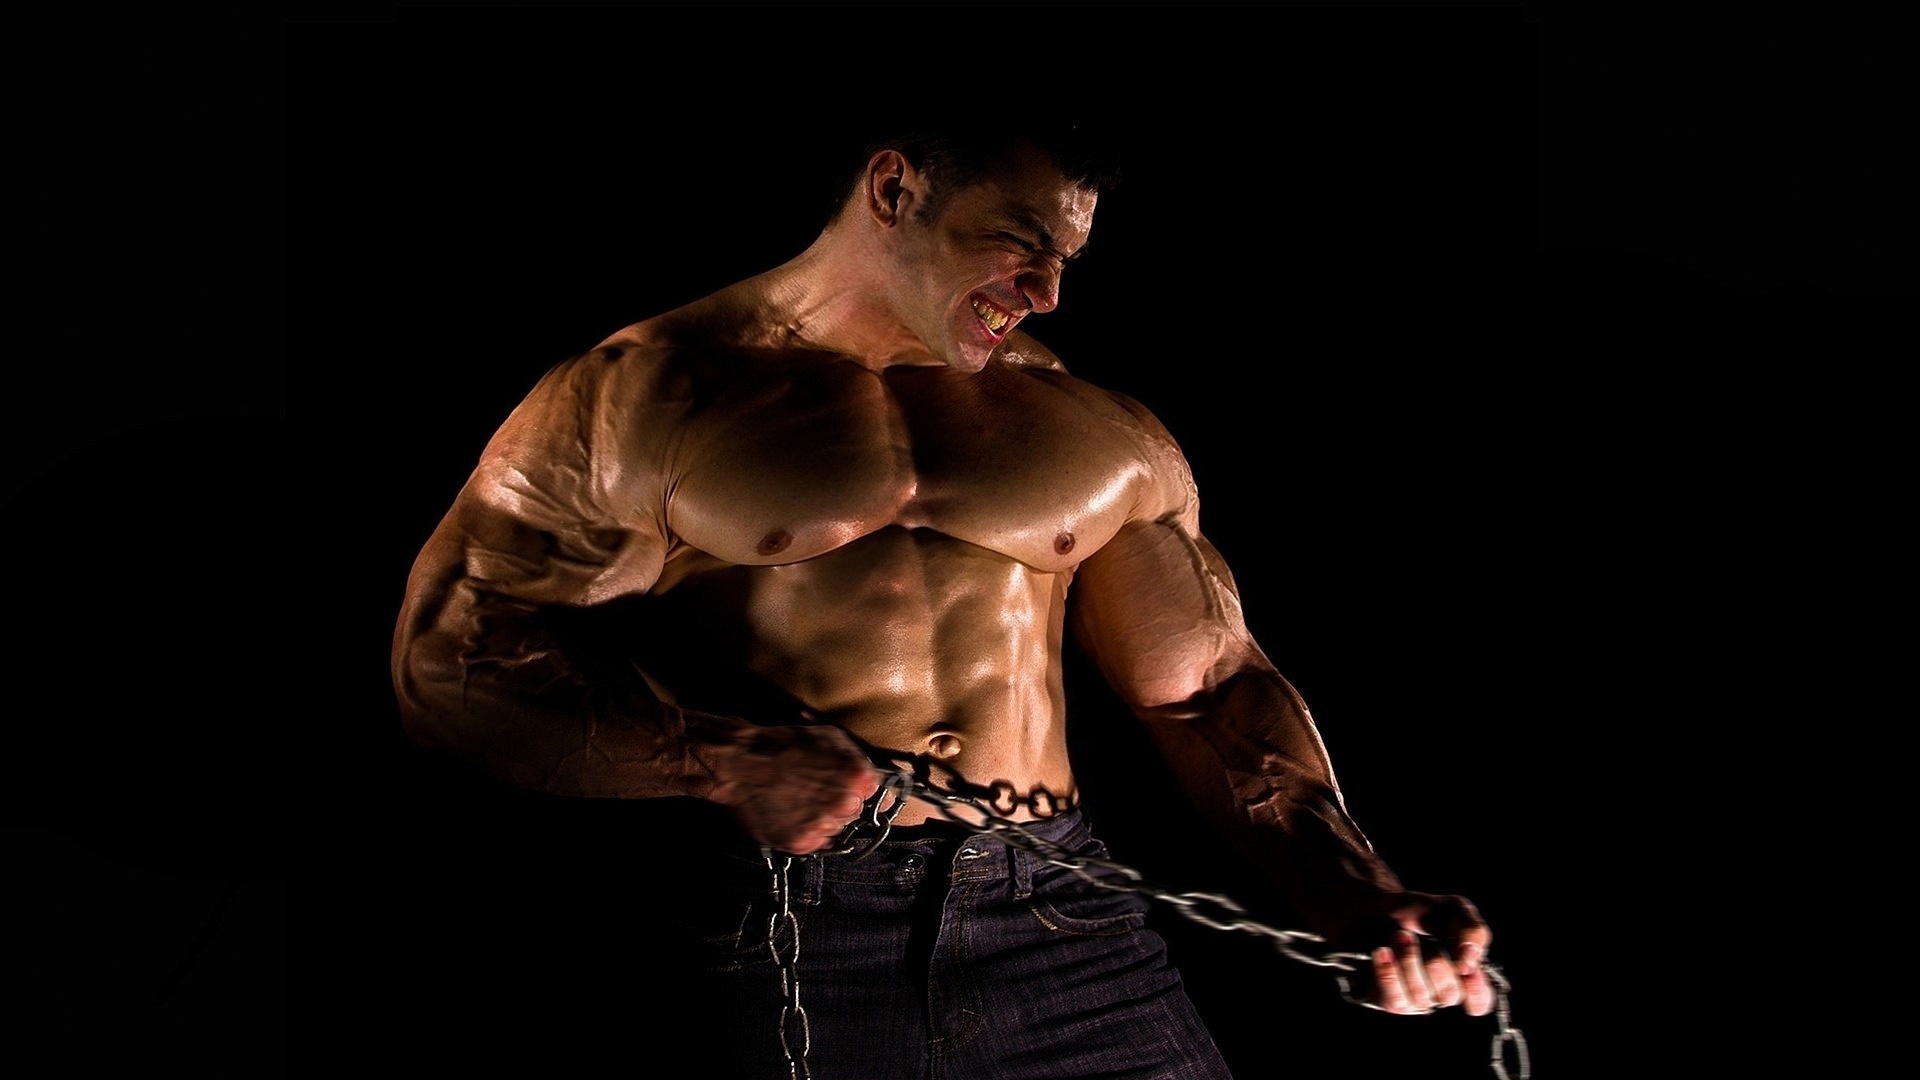 Download hd wallpapers of 32257-bodybuilder, Sports, Chain, Fitness, Muscle, ...